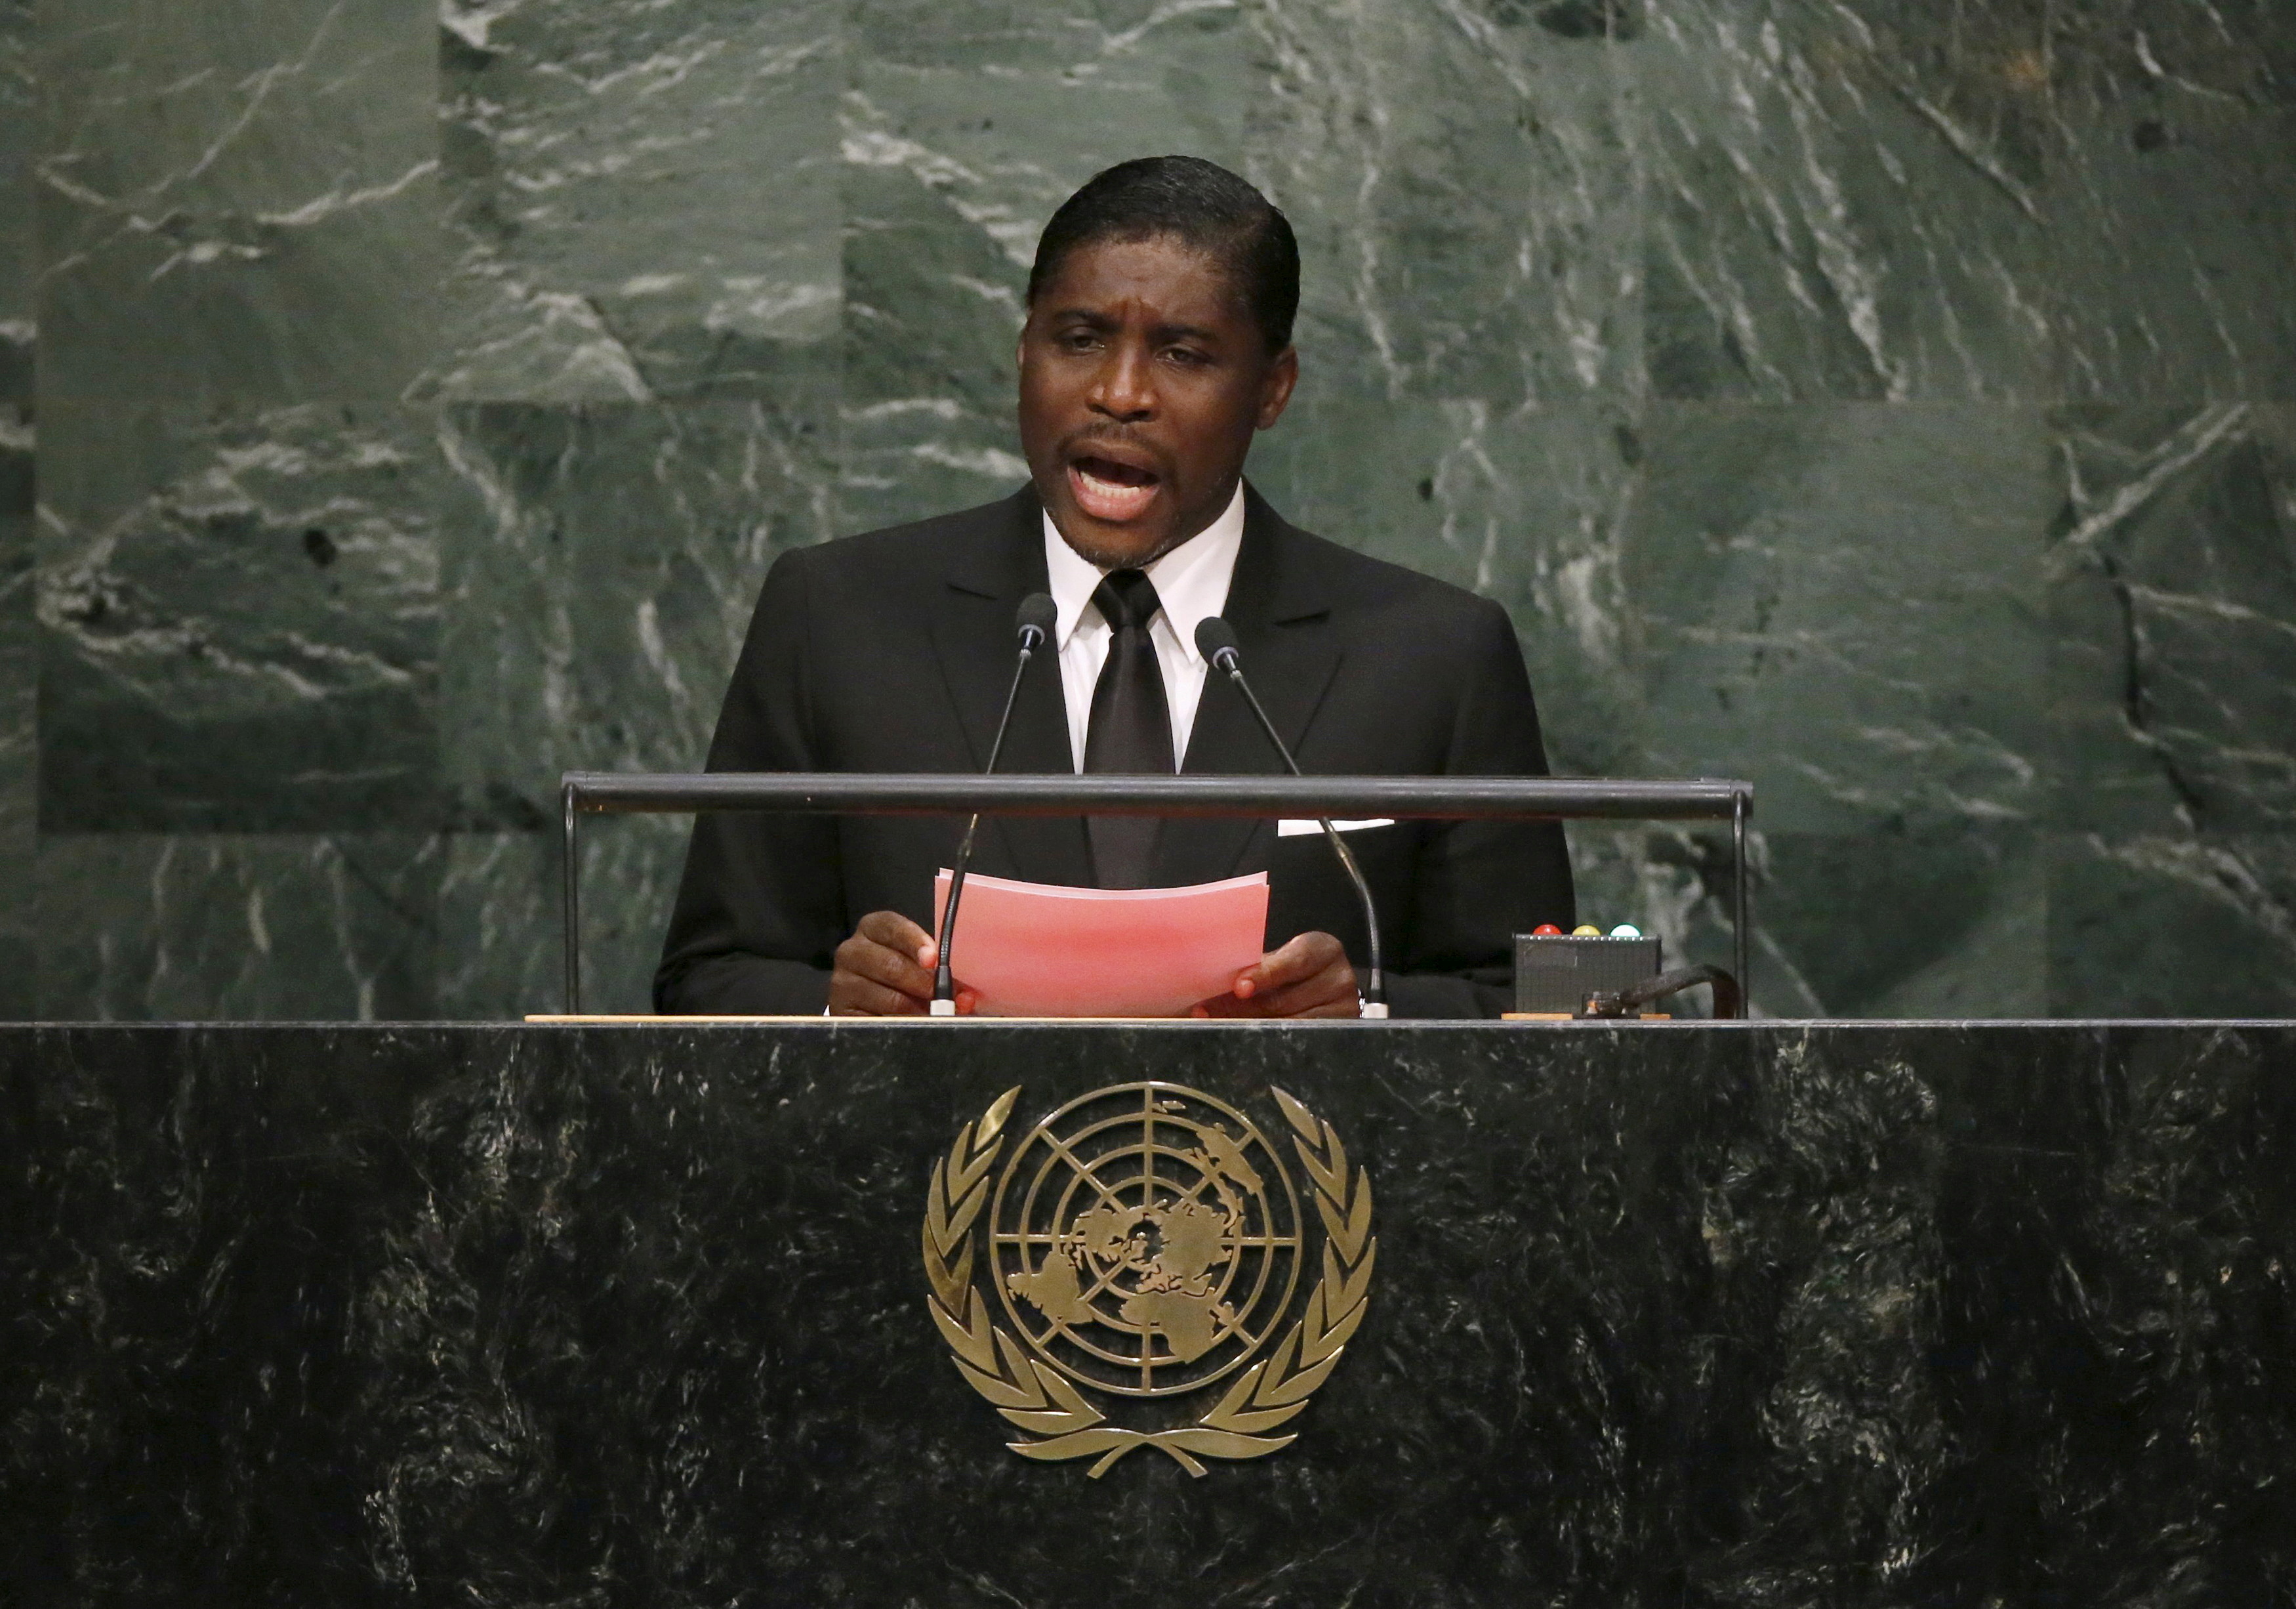 Equatorial Guinea's Second Vice-President Teodoro Nguema Obiang Mangue addresses a plenary meeting of the United Nations Sustainable Development Summit 2015 at the United Nations headquarters in Manhattan, New York